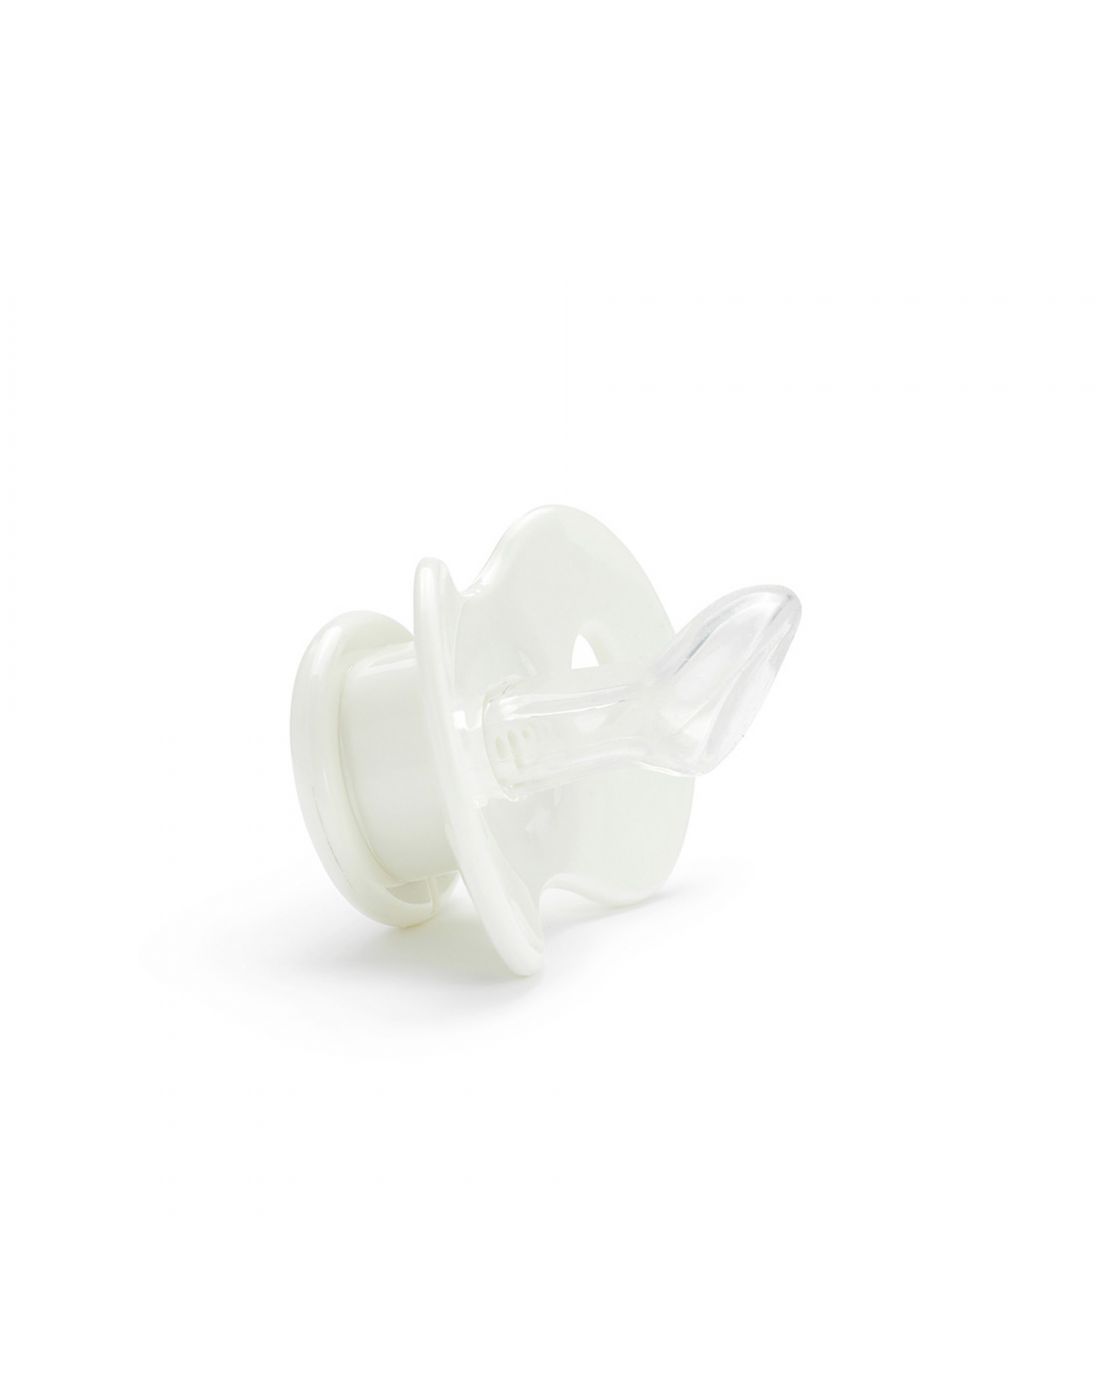 Elodie Details Baby Pacifier Meadow Flower 0-6 months